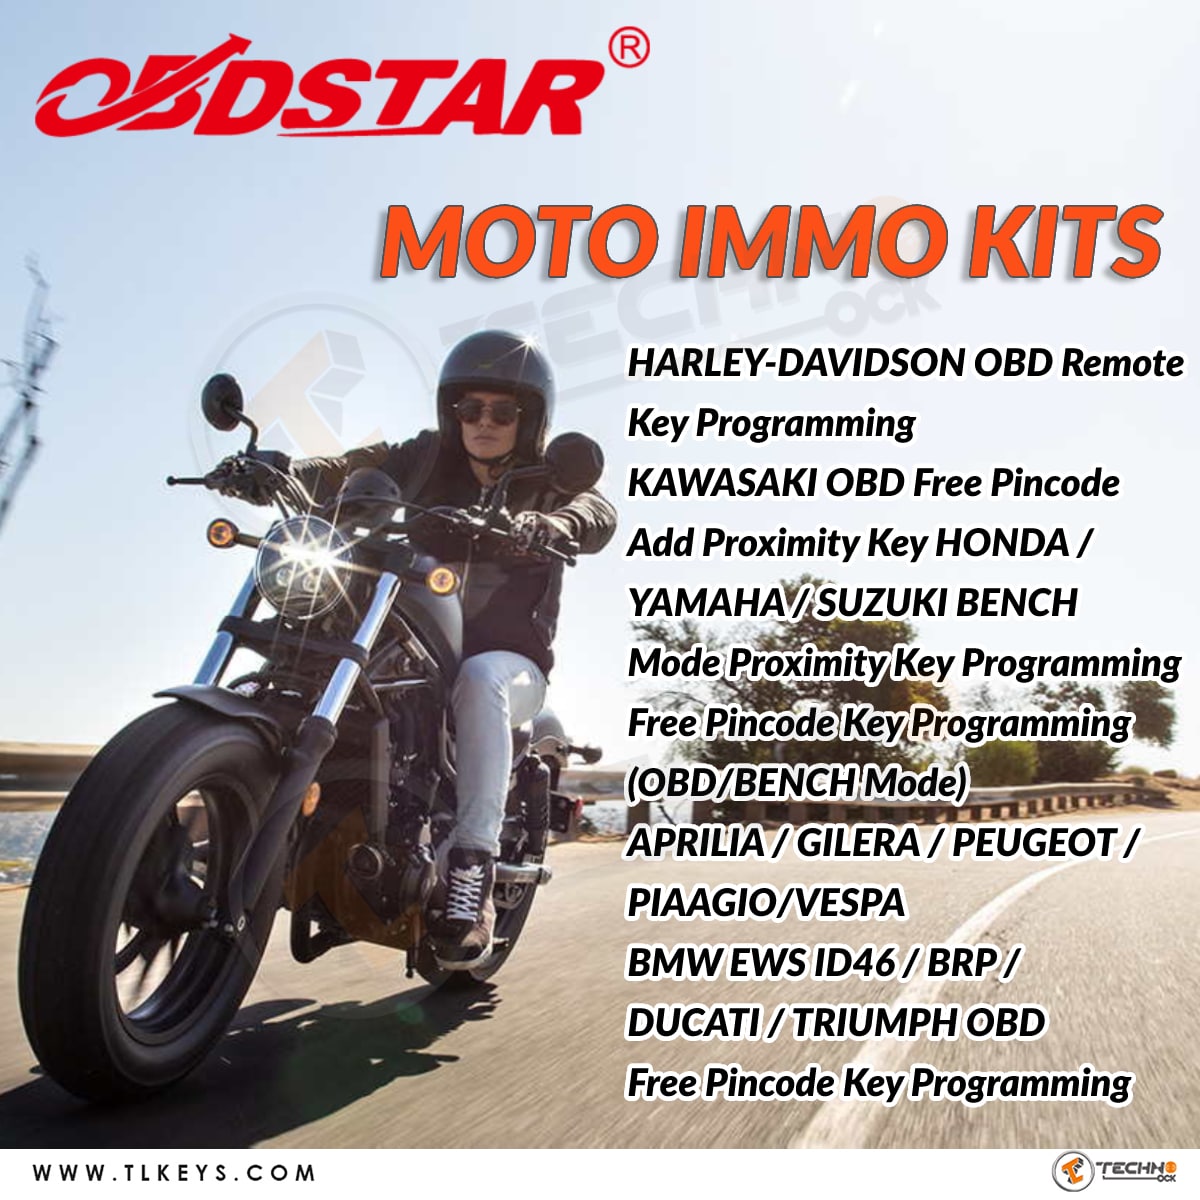 OBDSTAR MOTO IMMO Kits Motorcycle Adapters